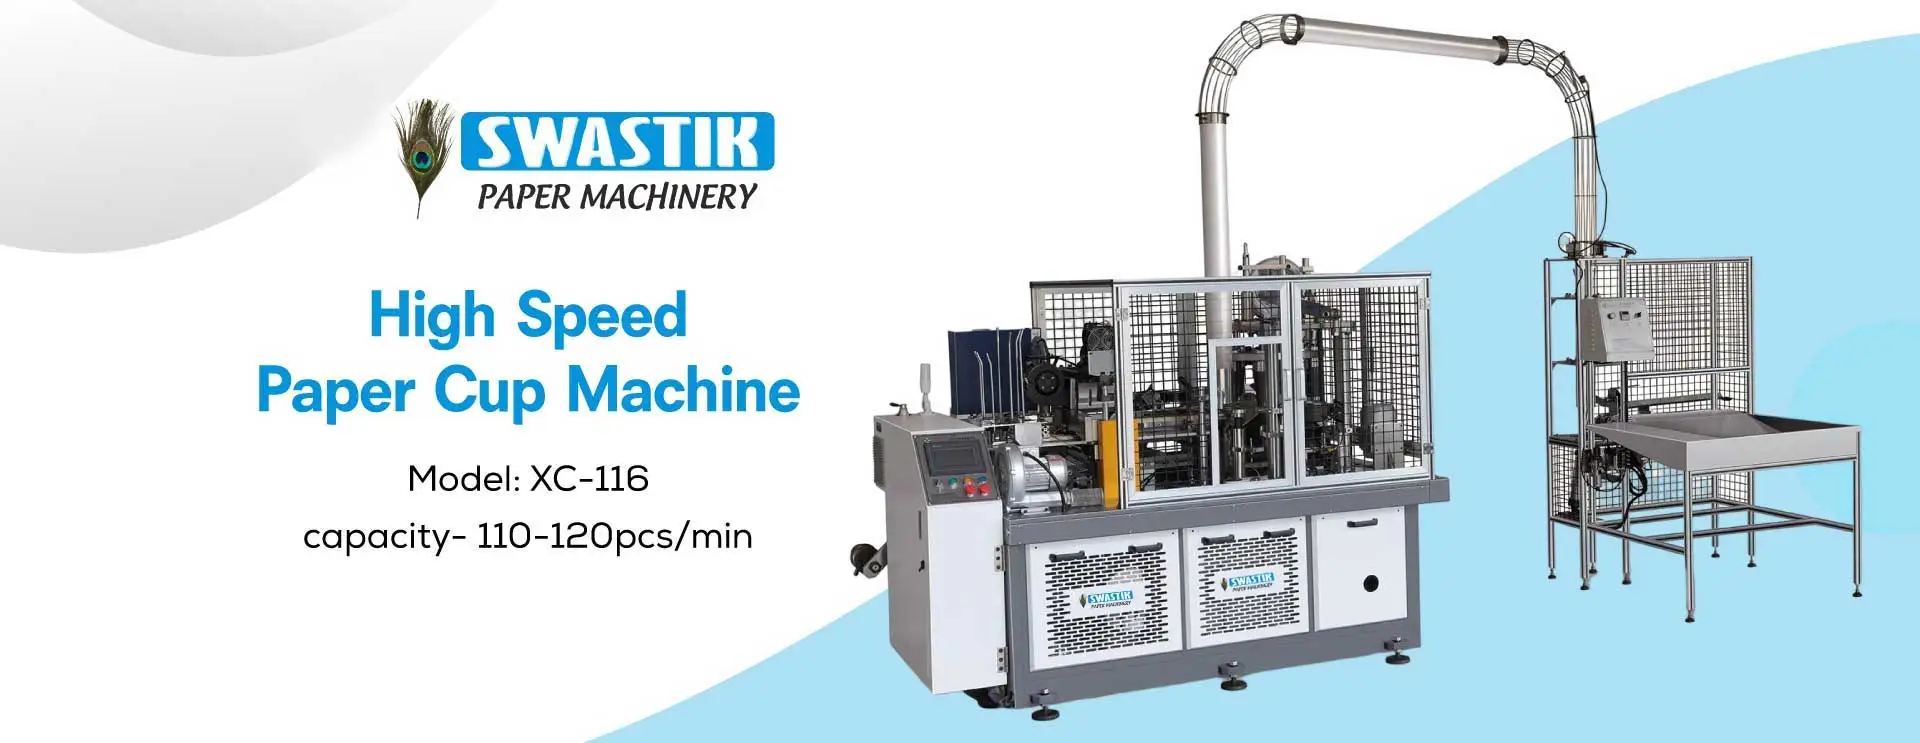 High Speed Paper Cup Machine Manufacturers in Pathankot